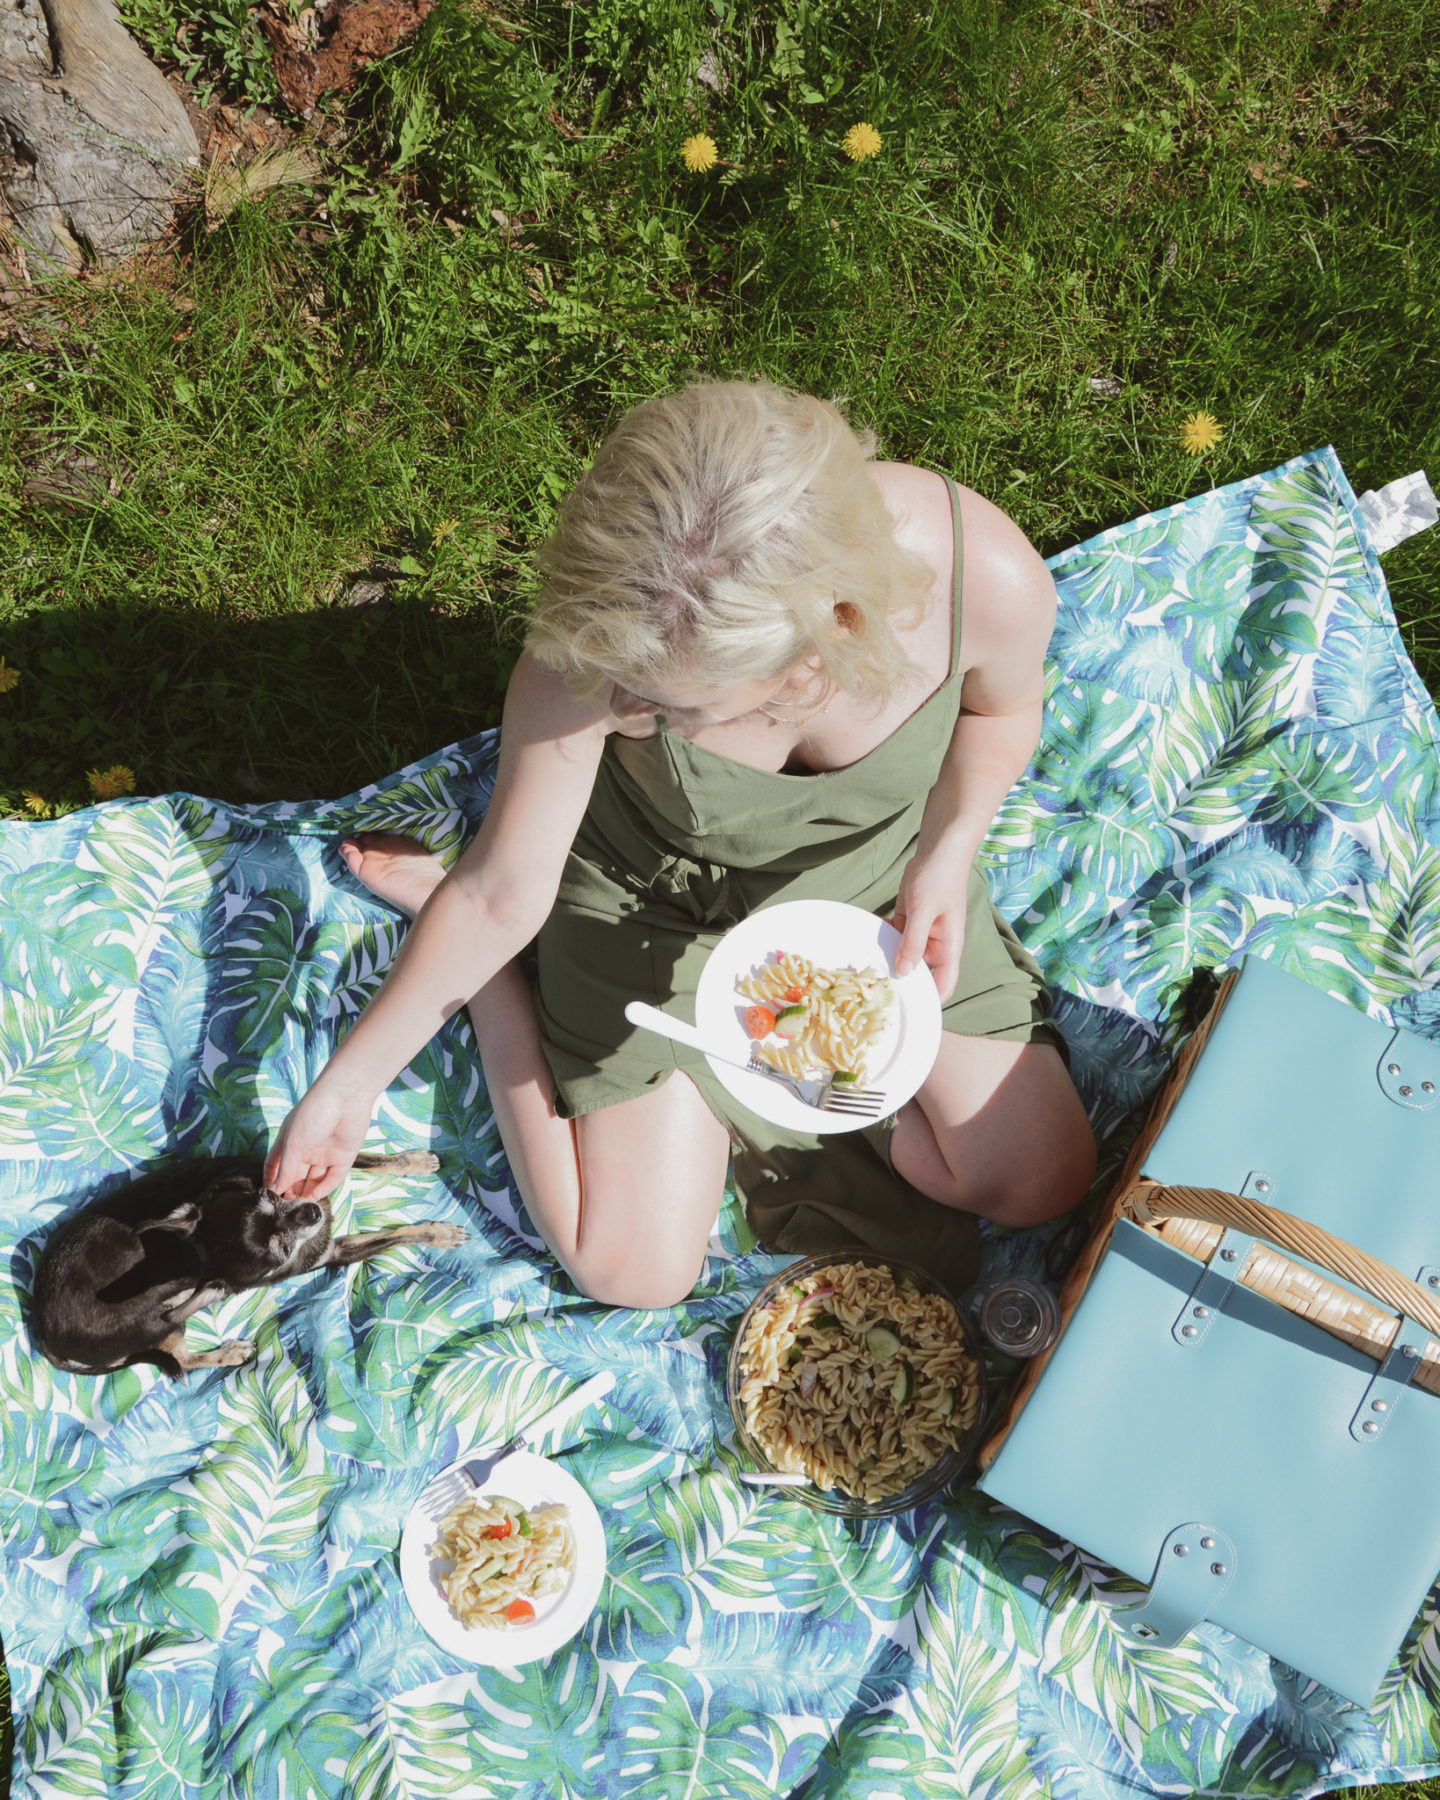 blonde woman and chihuahua with their picnic essentials